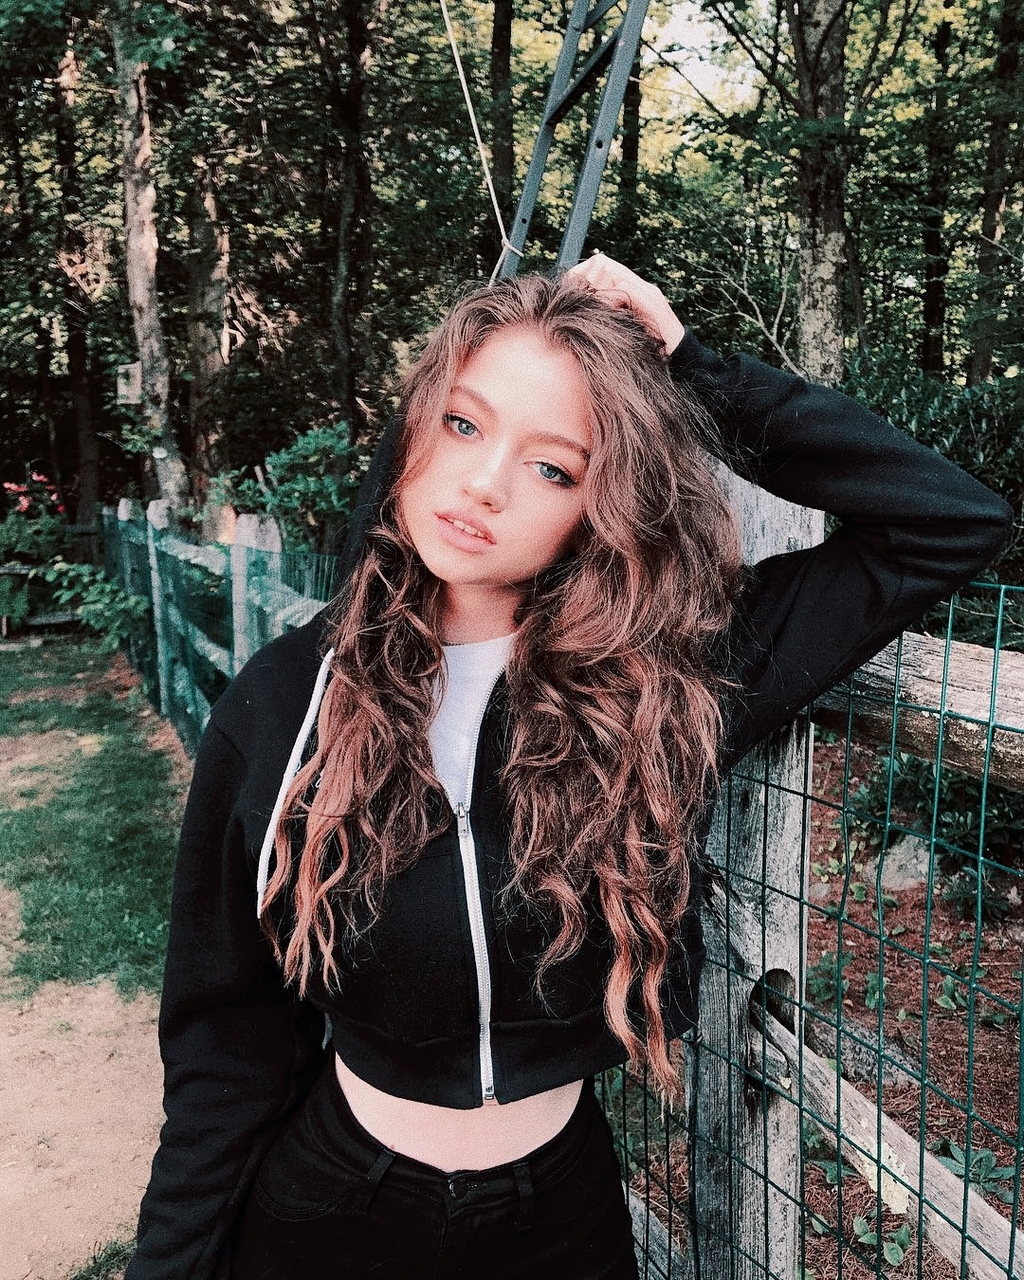 image about ❤ Dytto. See more about dytto